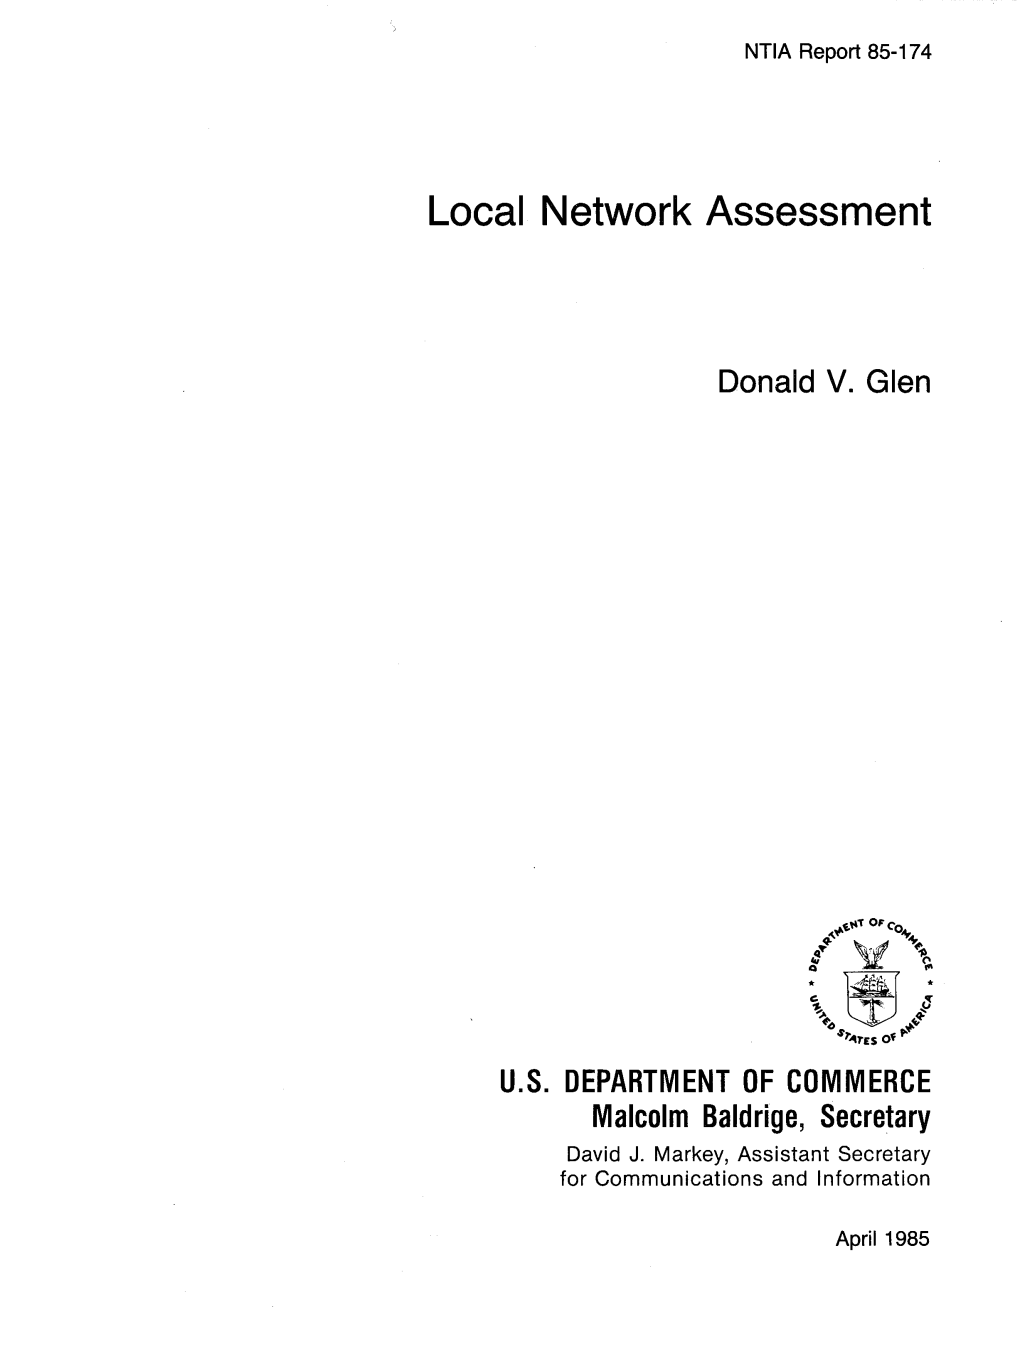 NTIA Technical Report TR-85-174 Local Network Assessment